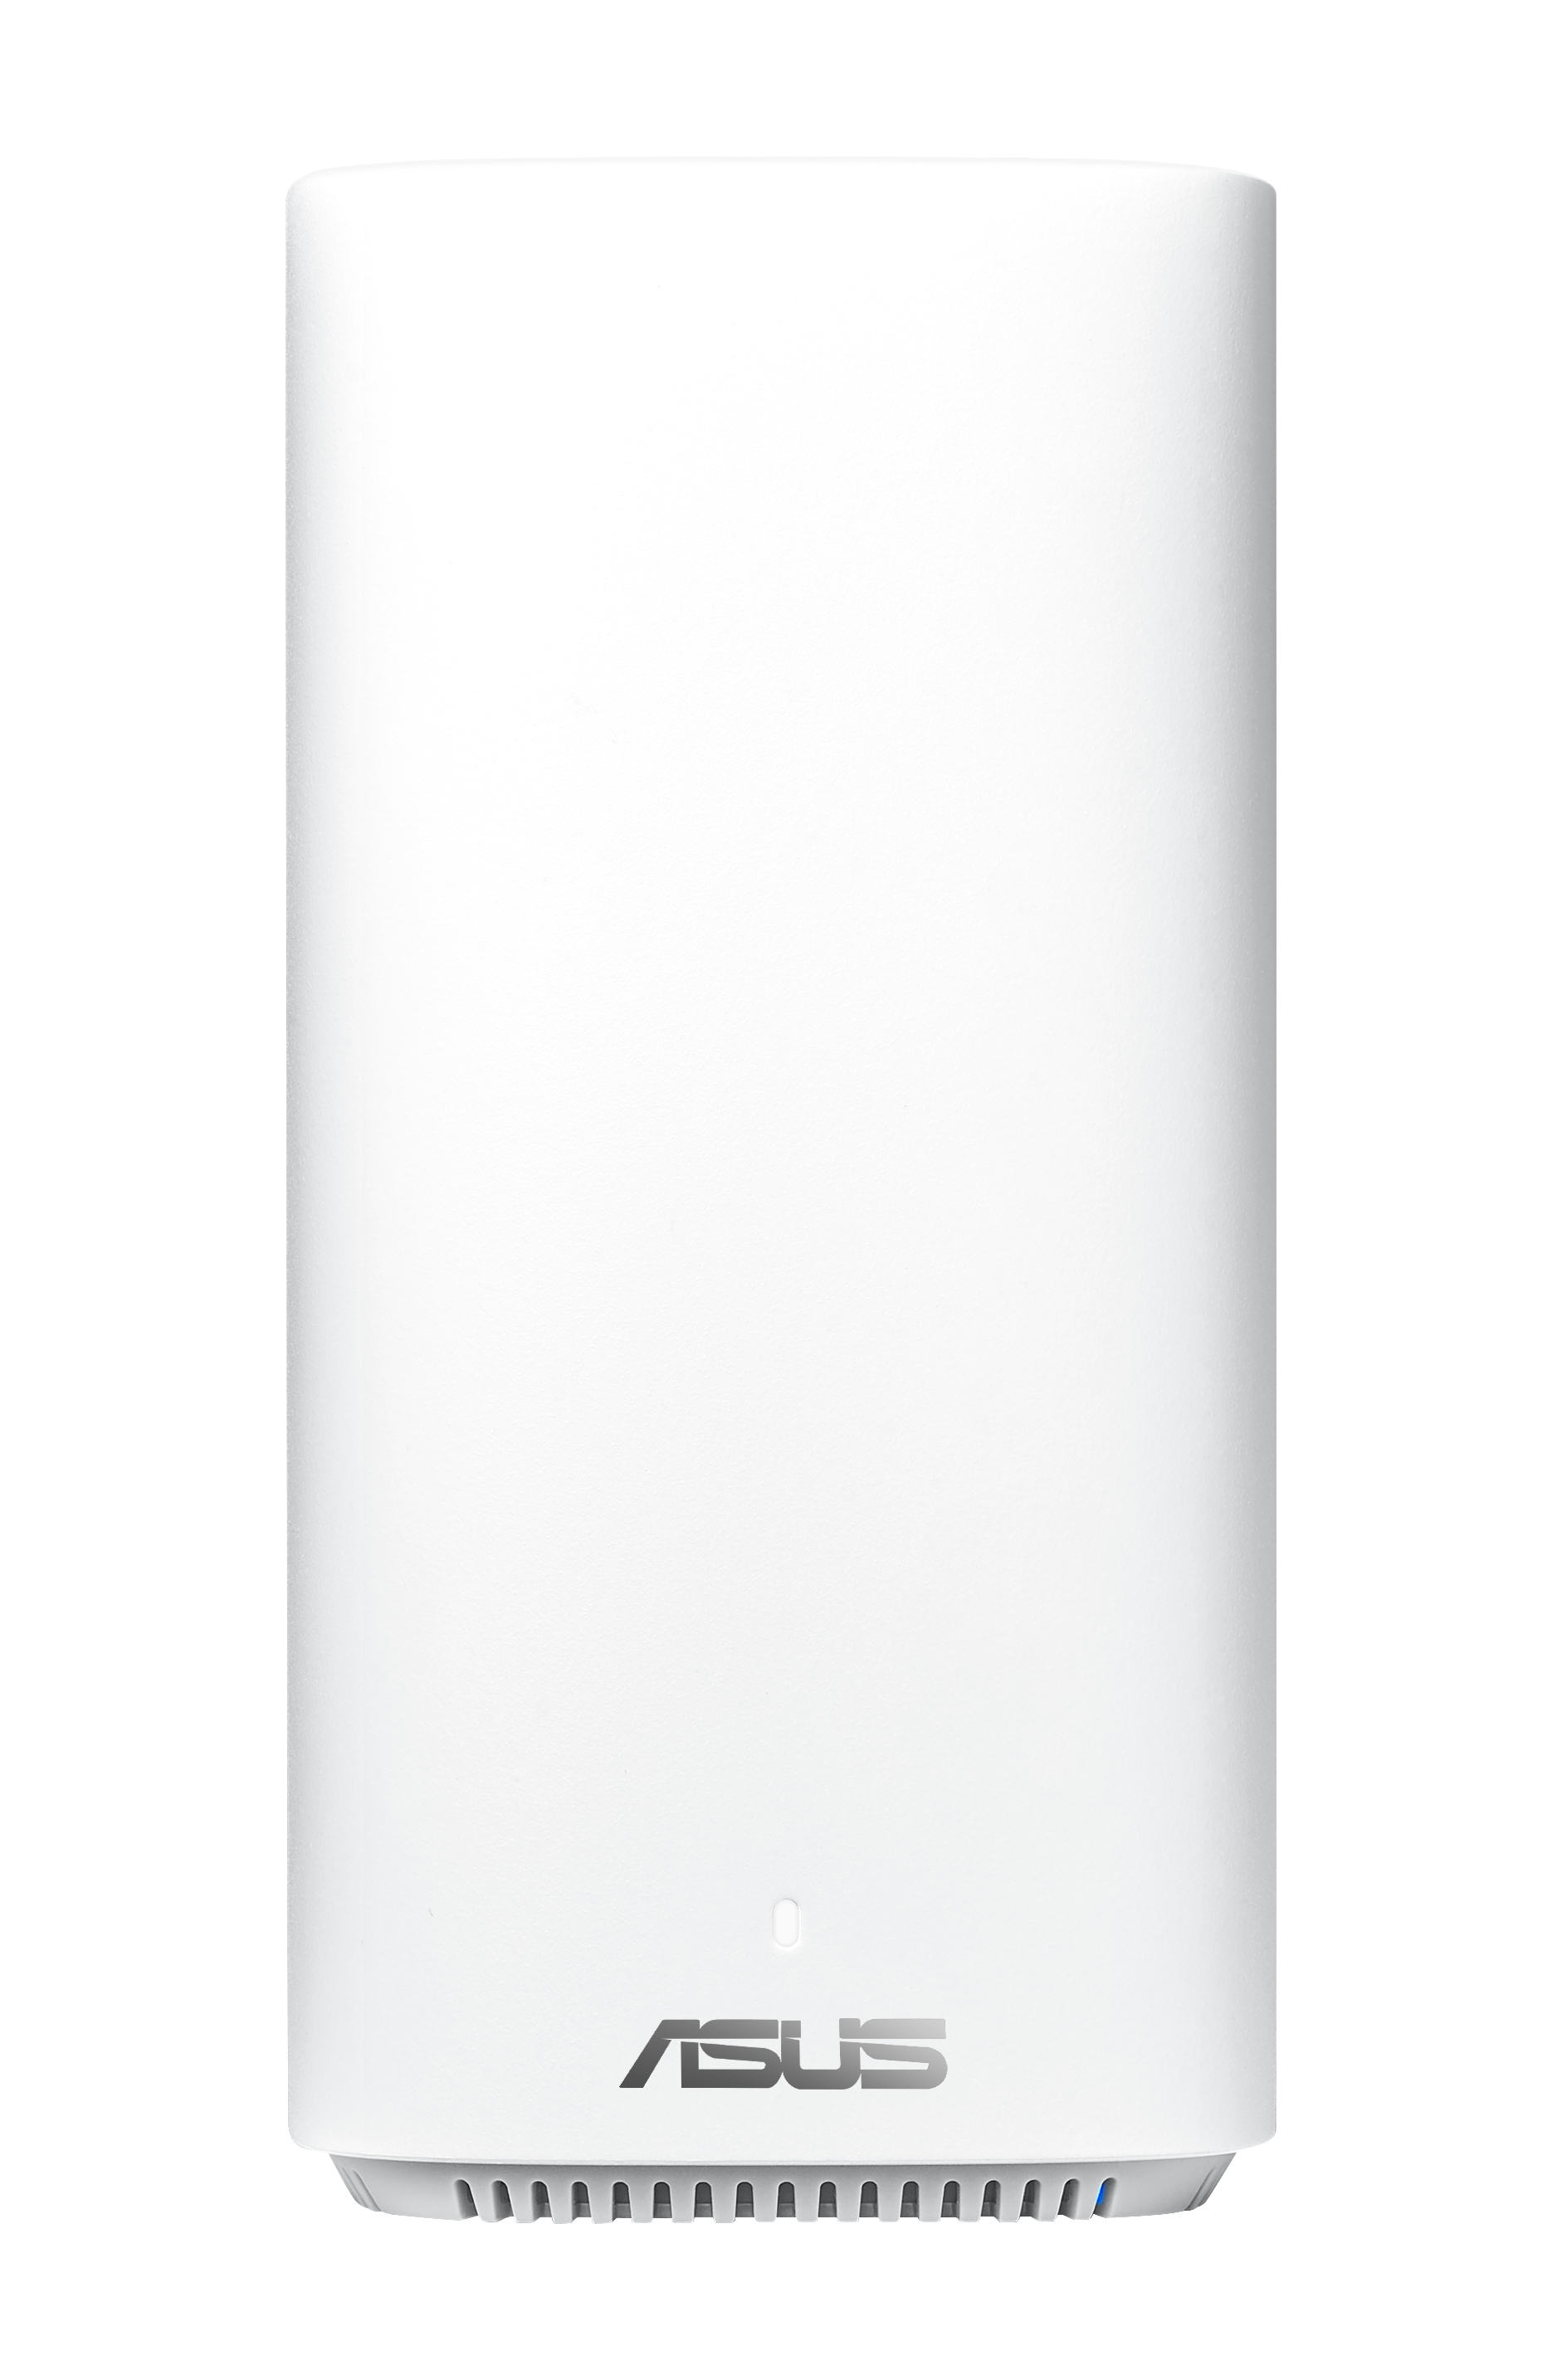  ZenWiFi CD6 1PK With UK Plug 1500Mbps Dual-band mesh Wi-Fi system for seamless coverage up to 465 Sq. Meter